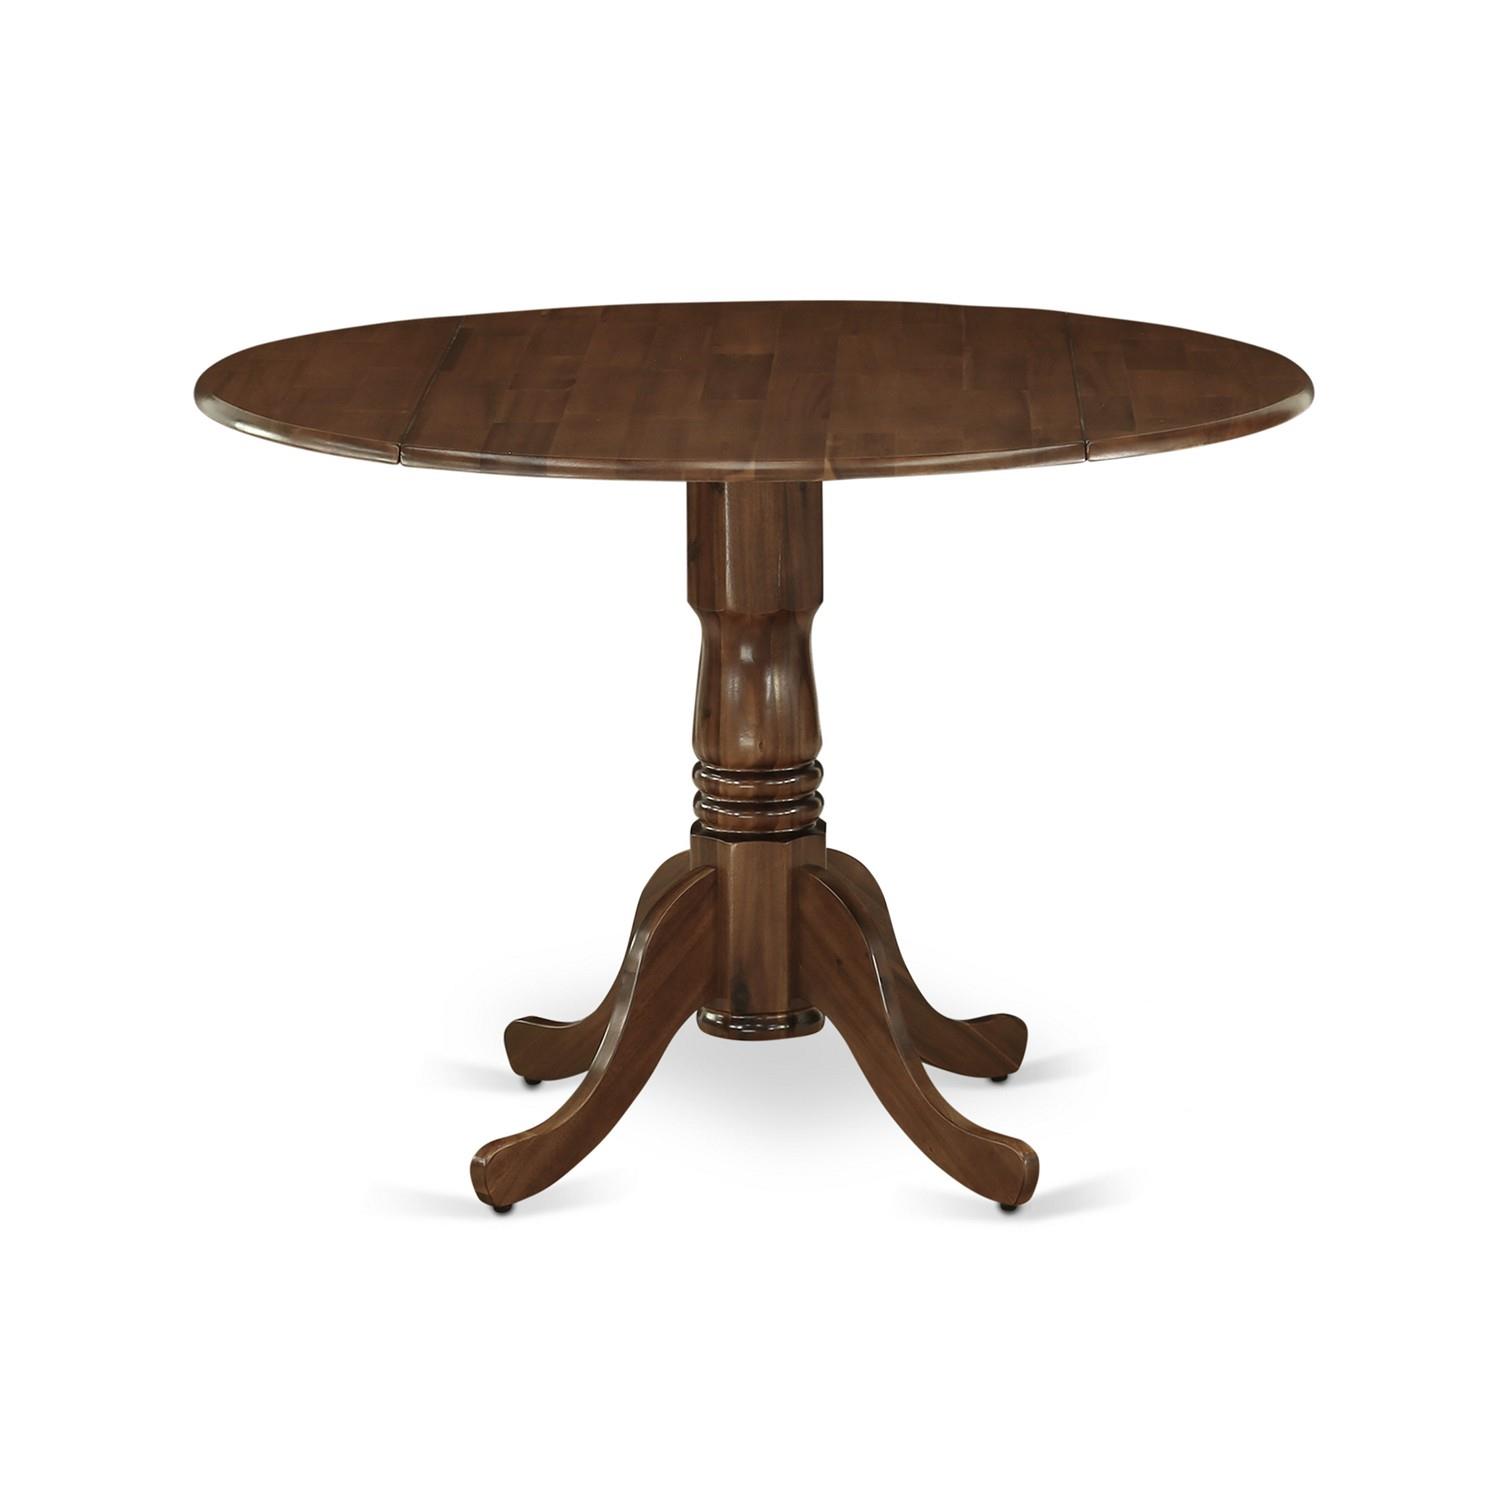 East West Furniture DLT-AWA-TP Dublin Dining Table Made of Rubber Wood with Two 9 Inch Drop Leaves, 42 Inch Round, Walnut Finish